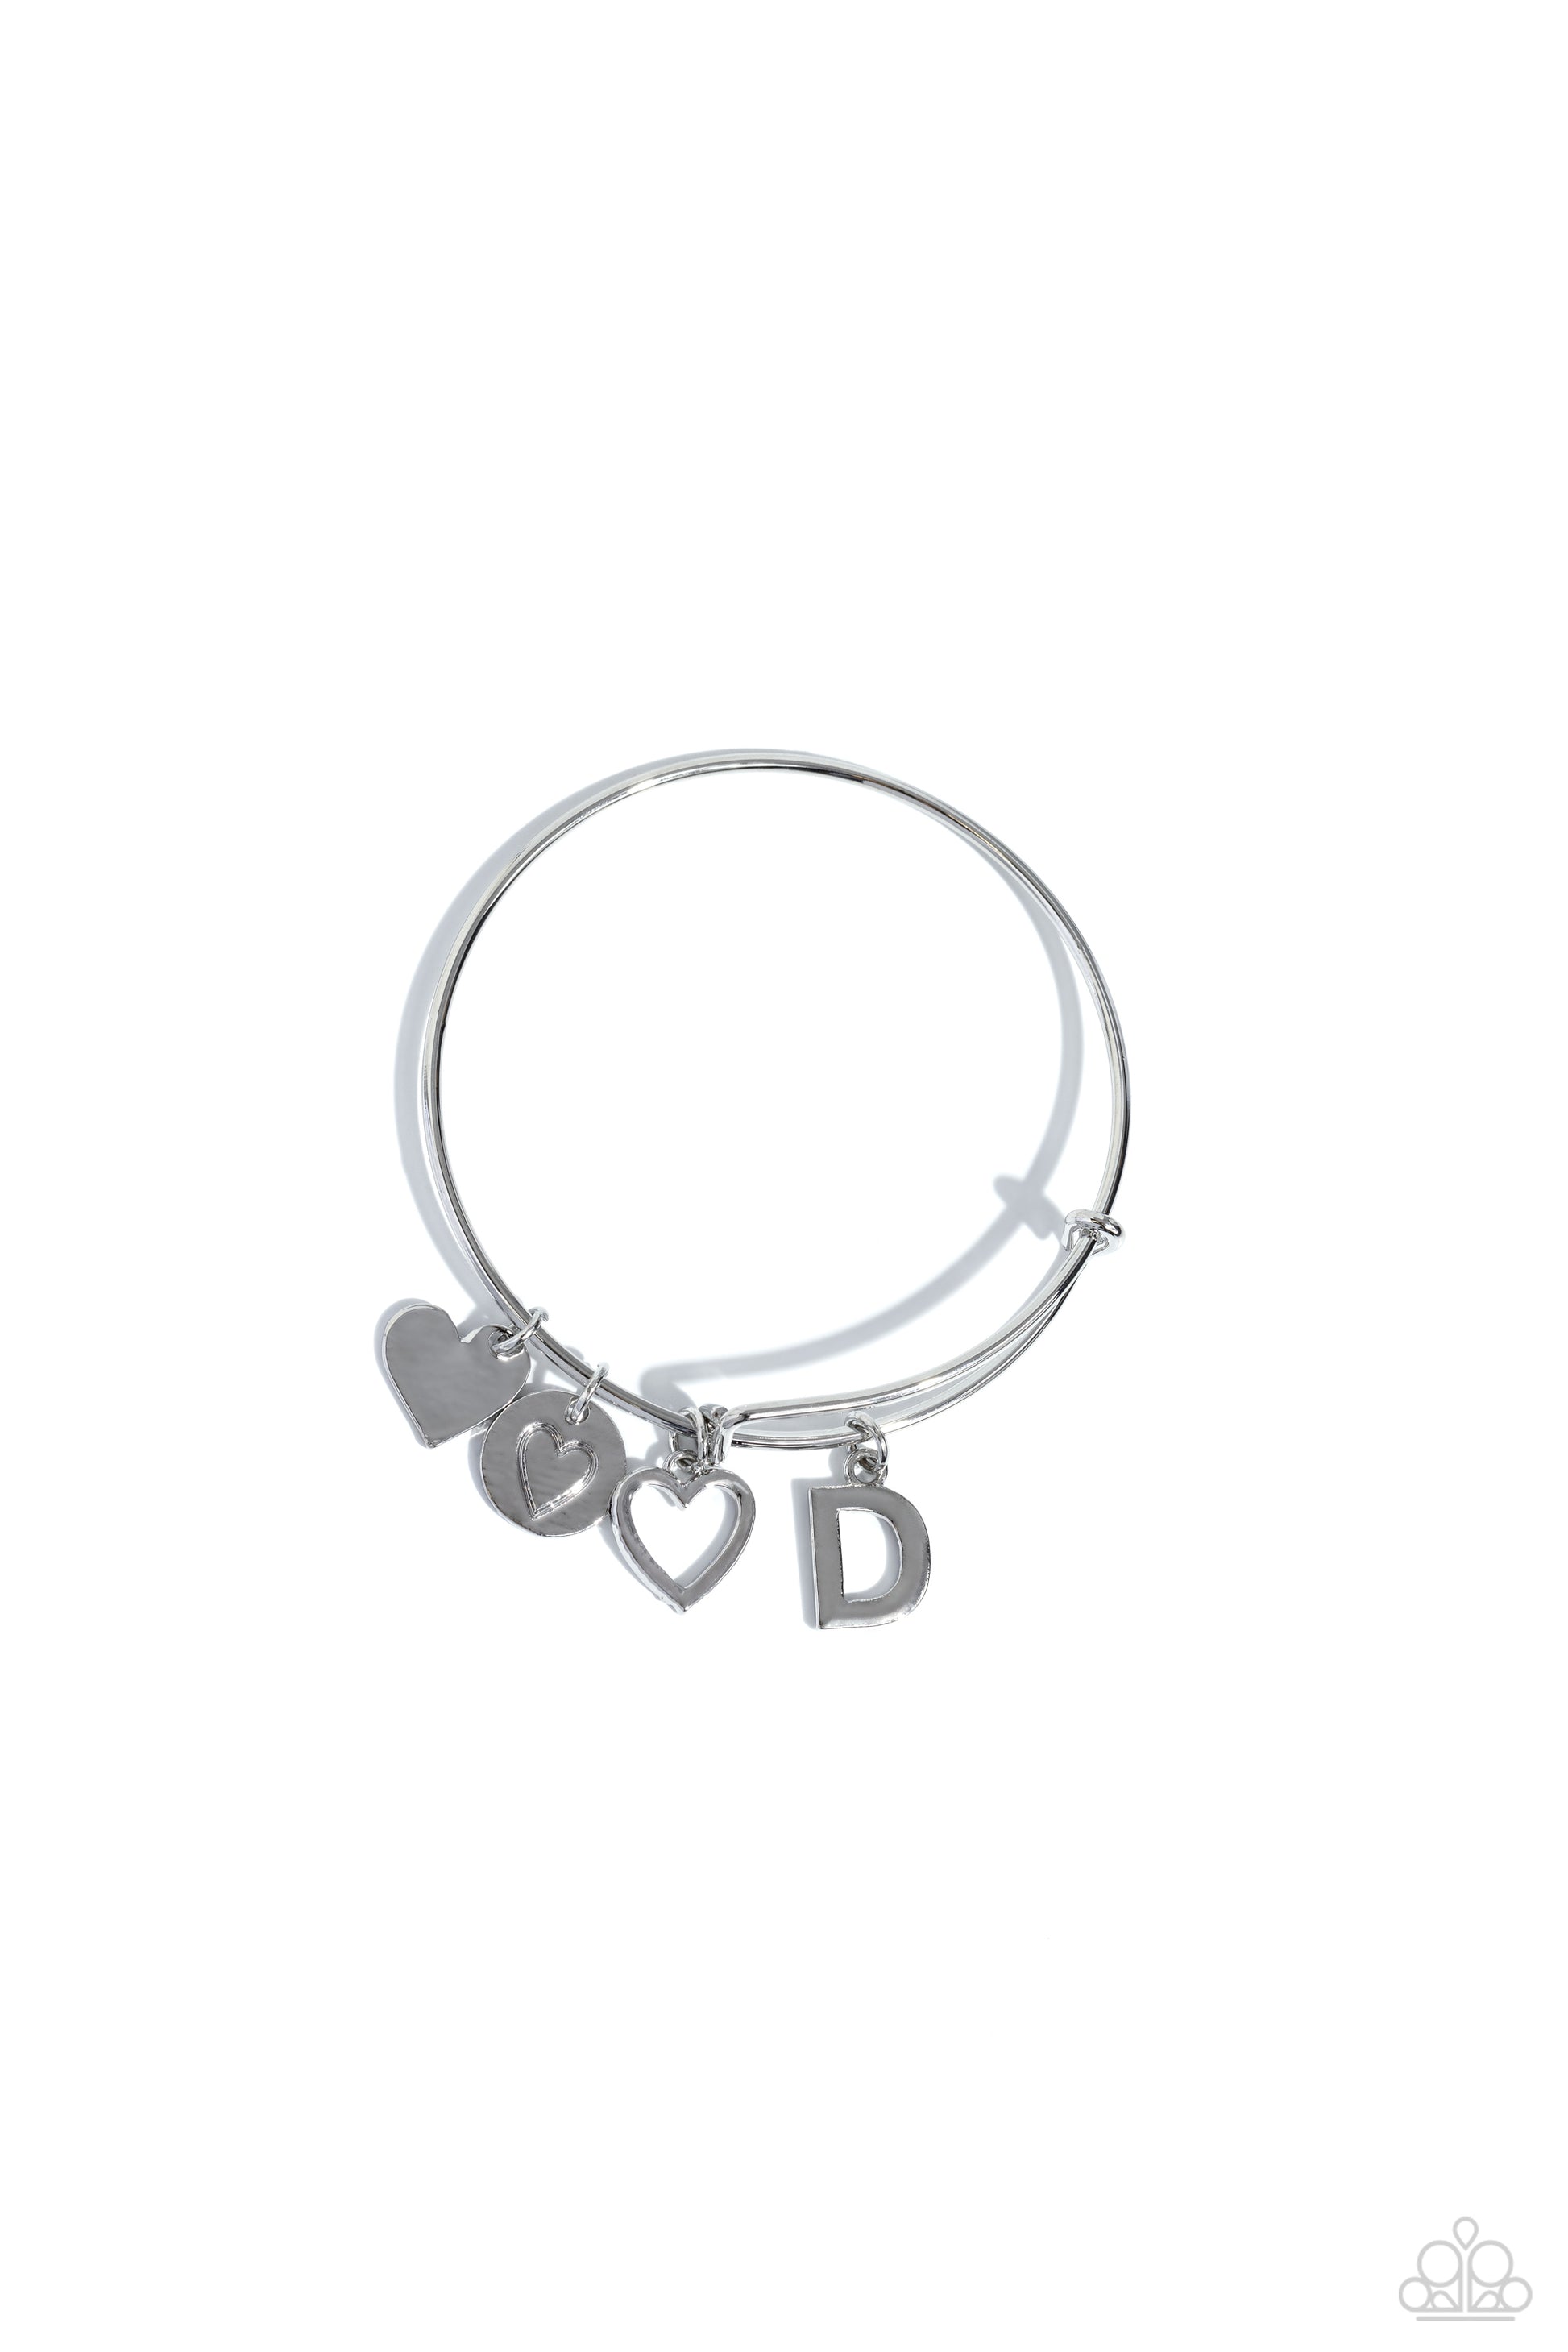 Making It INITIAL Silver "D" Bracelet - Paparazzi Accessories  Featuring shiny silver, airy, and stamped finishes, a mismatched collection of dainty heart charms, and the letter "D" glides along a silver bar fitting at the center of the wrist for a romantic, sentimental flair.  Sold as one individual bracelet.  SKU: P9BA-SVXX-188XX